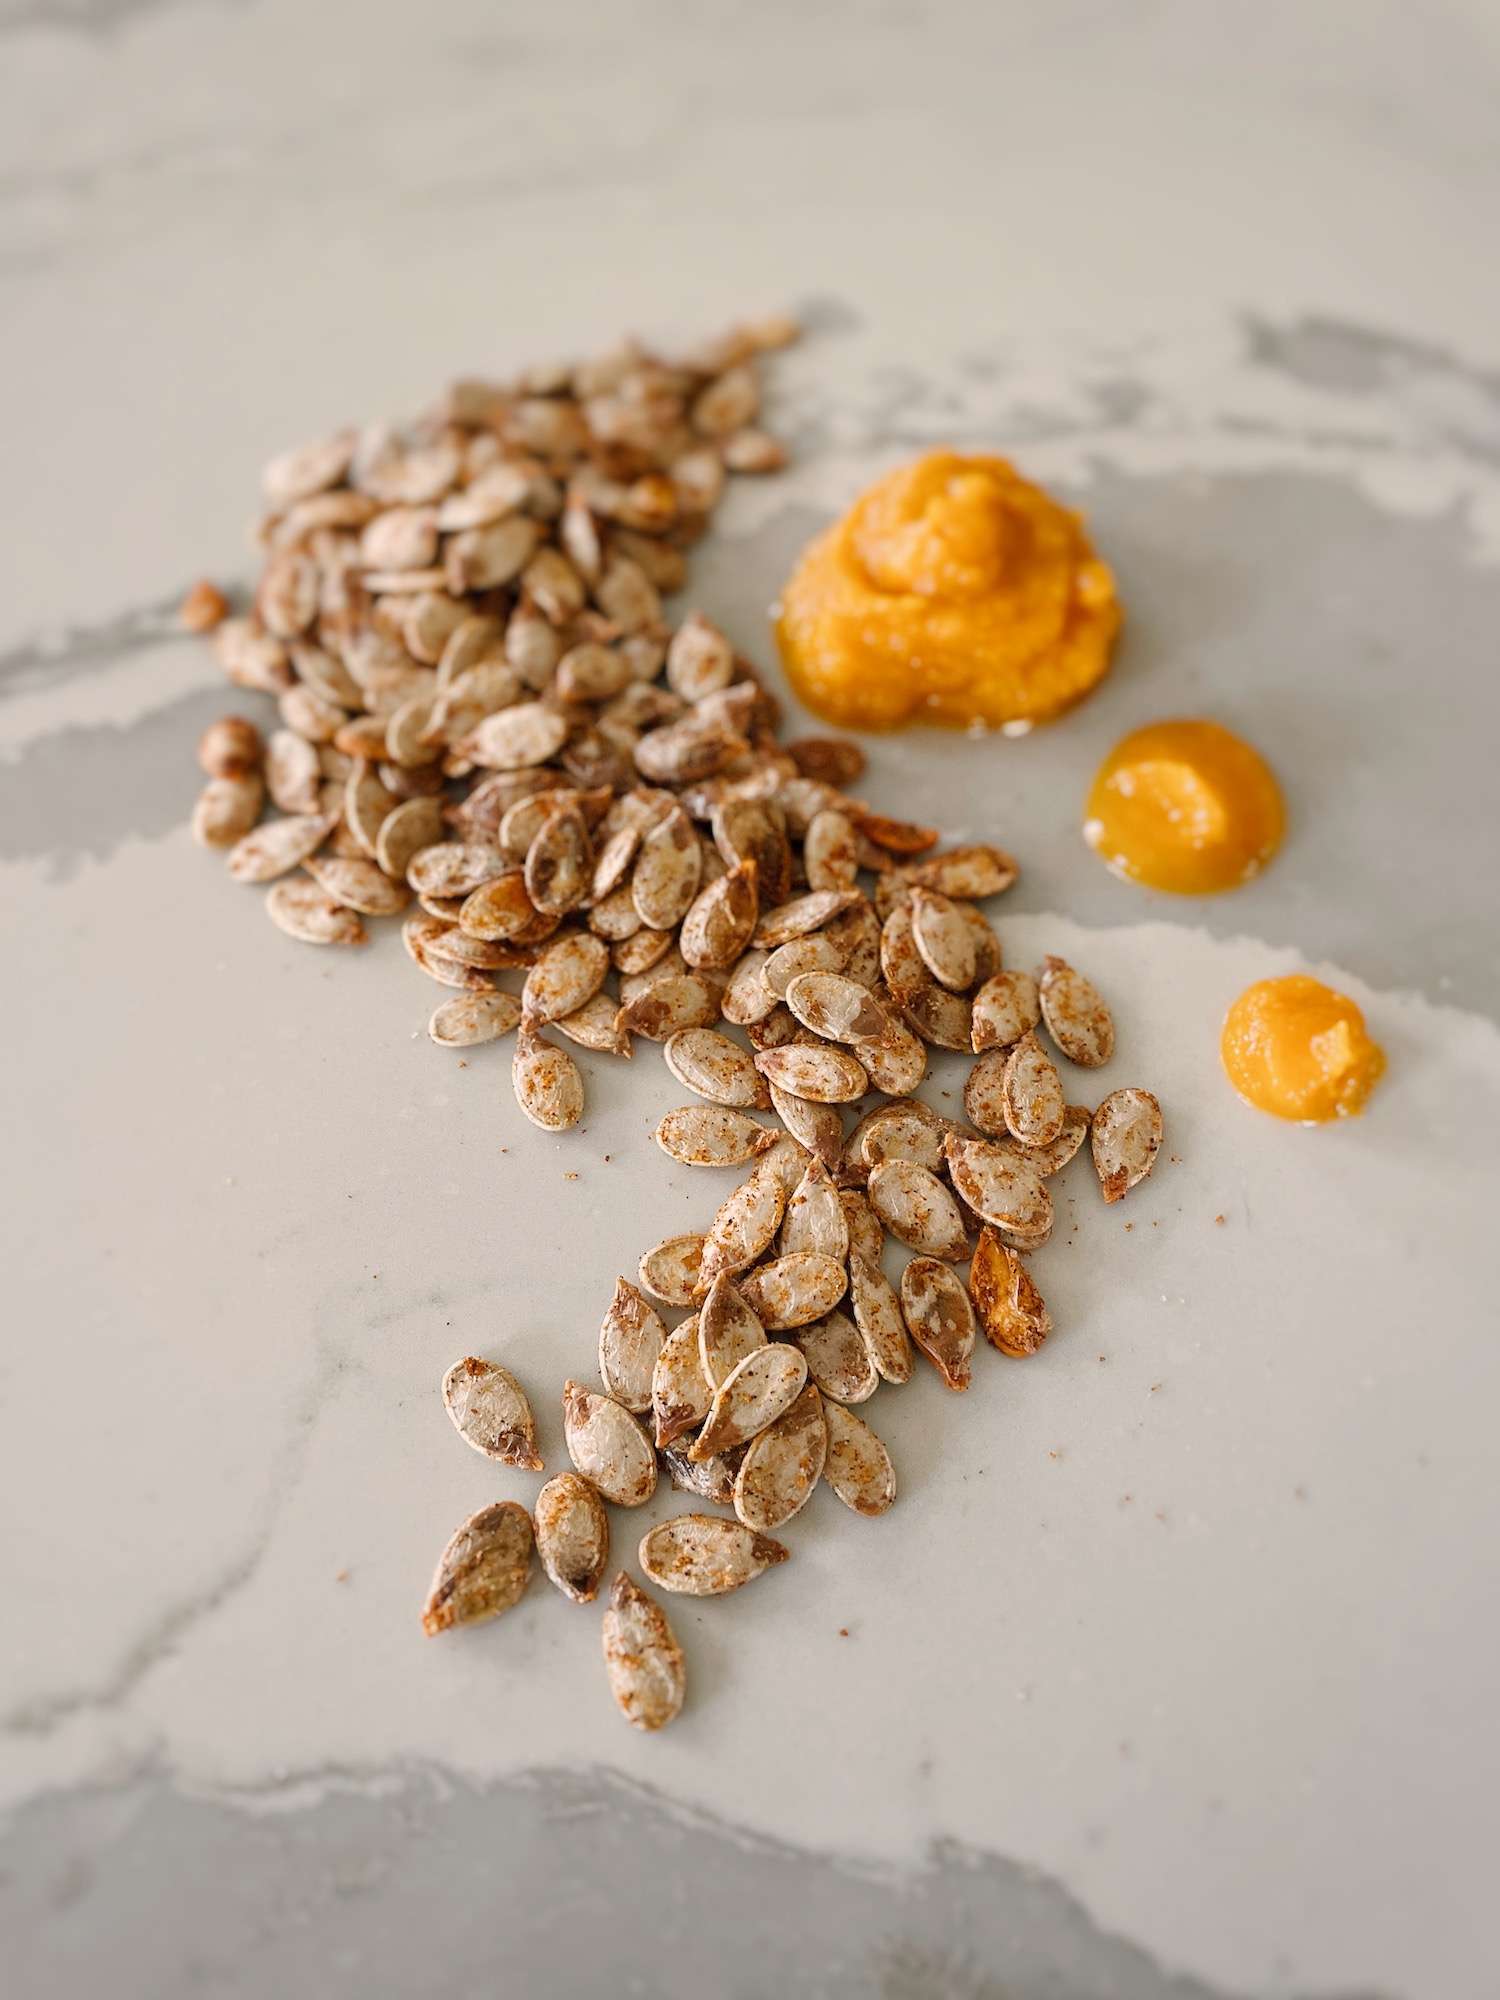 Pumpkin seeds laid out on a kitchen island in a swirl pattern with 3 dots of pureed pumpkin.